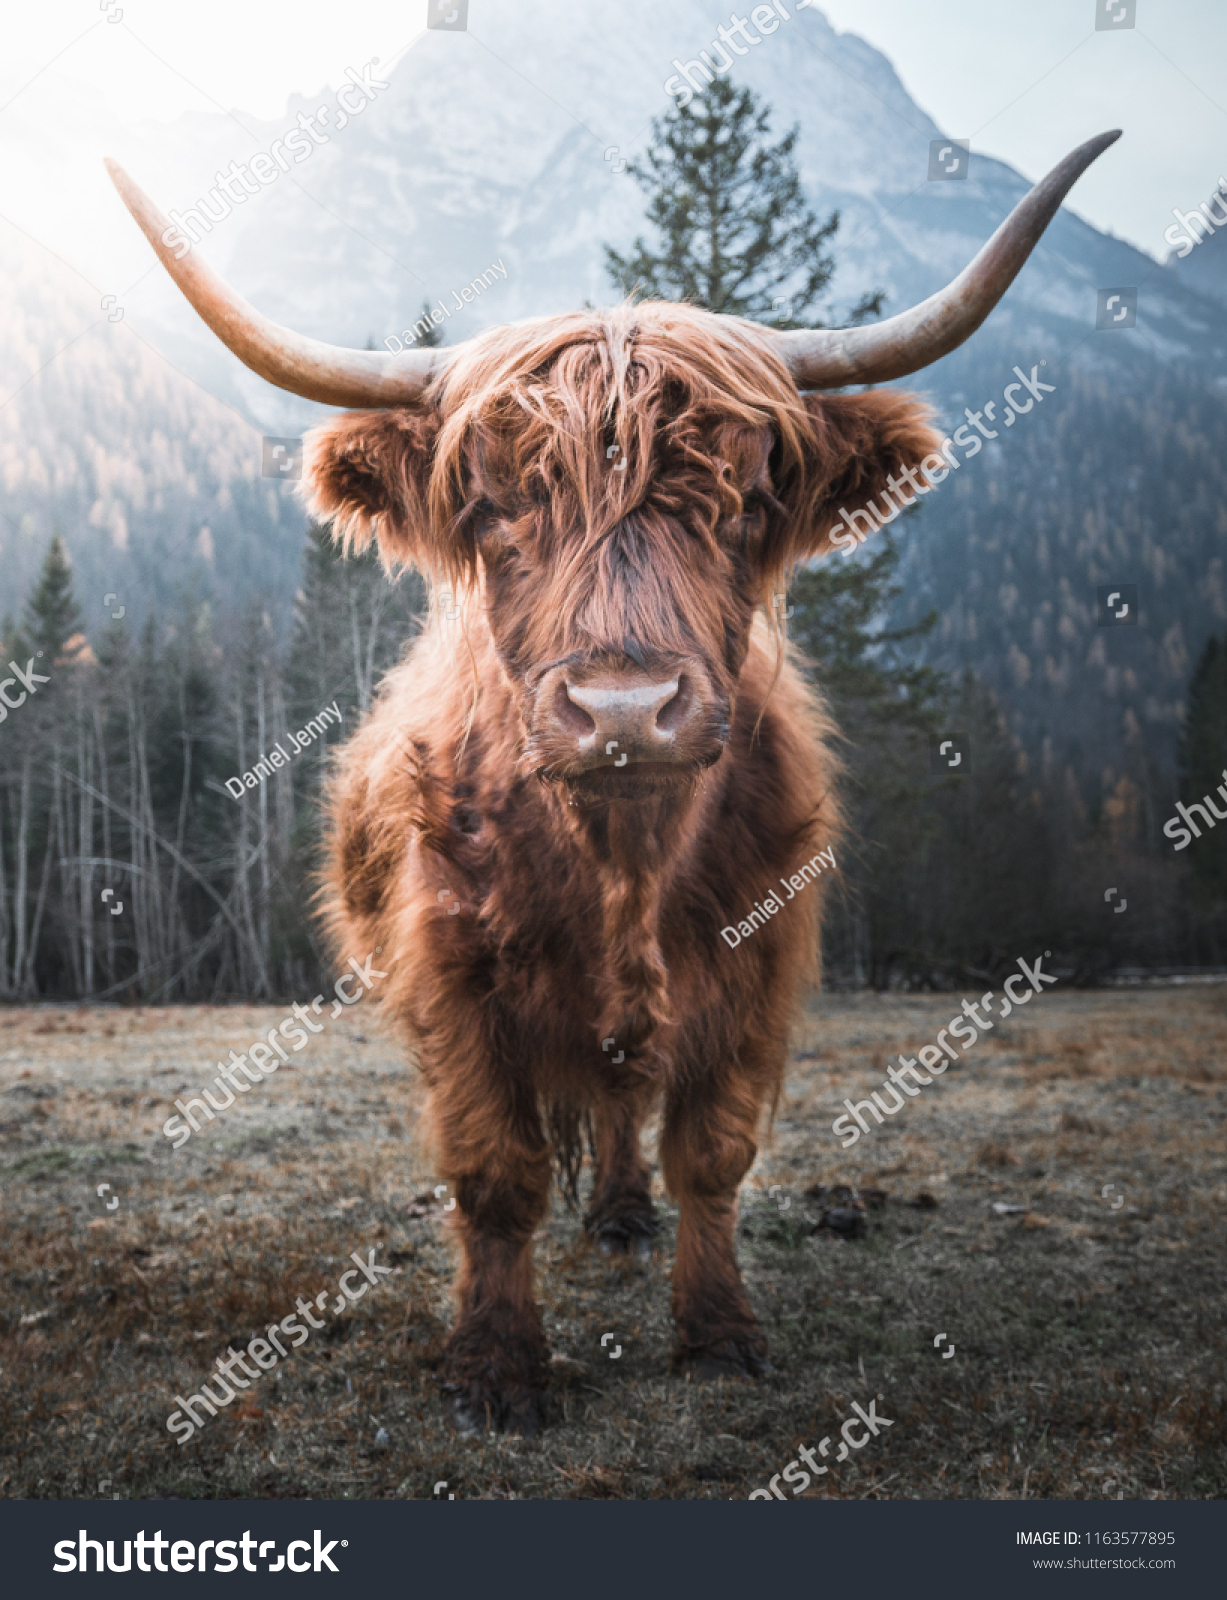 Beautiful horned Highland Cattle enjoying the Sunrise on a Frozen Meadow in the Italian Dolomites #1163577895